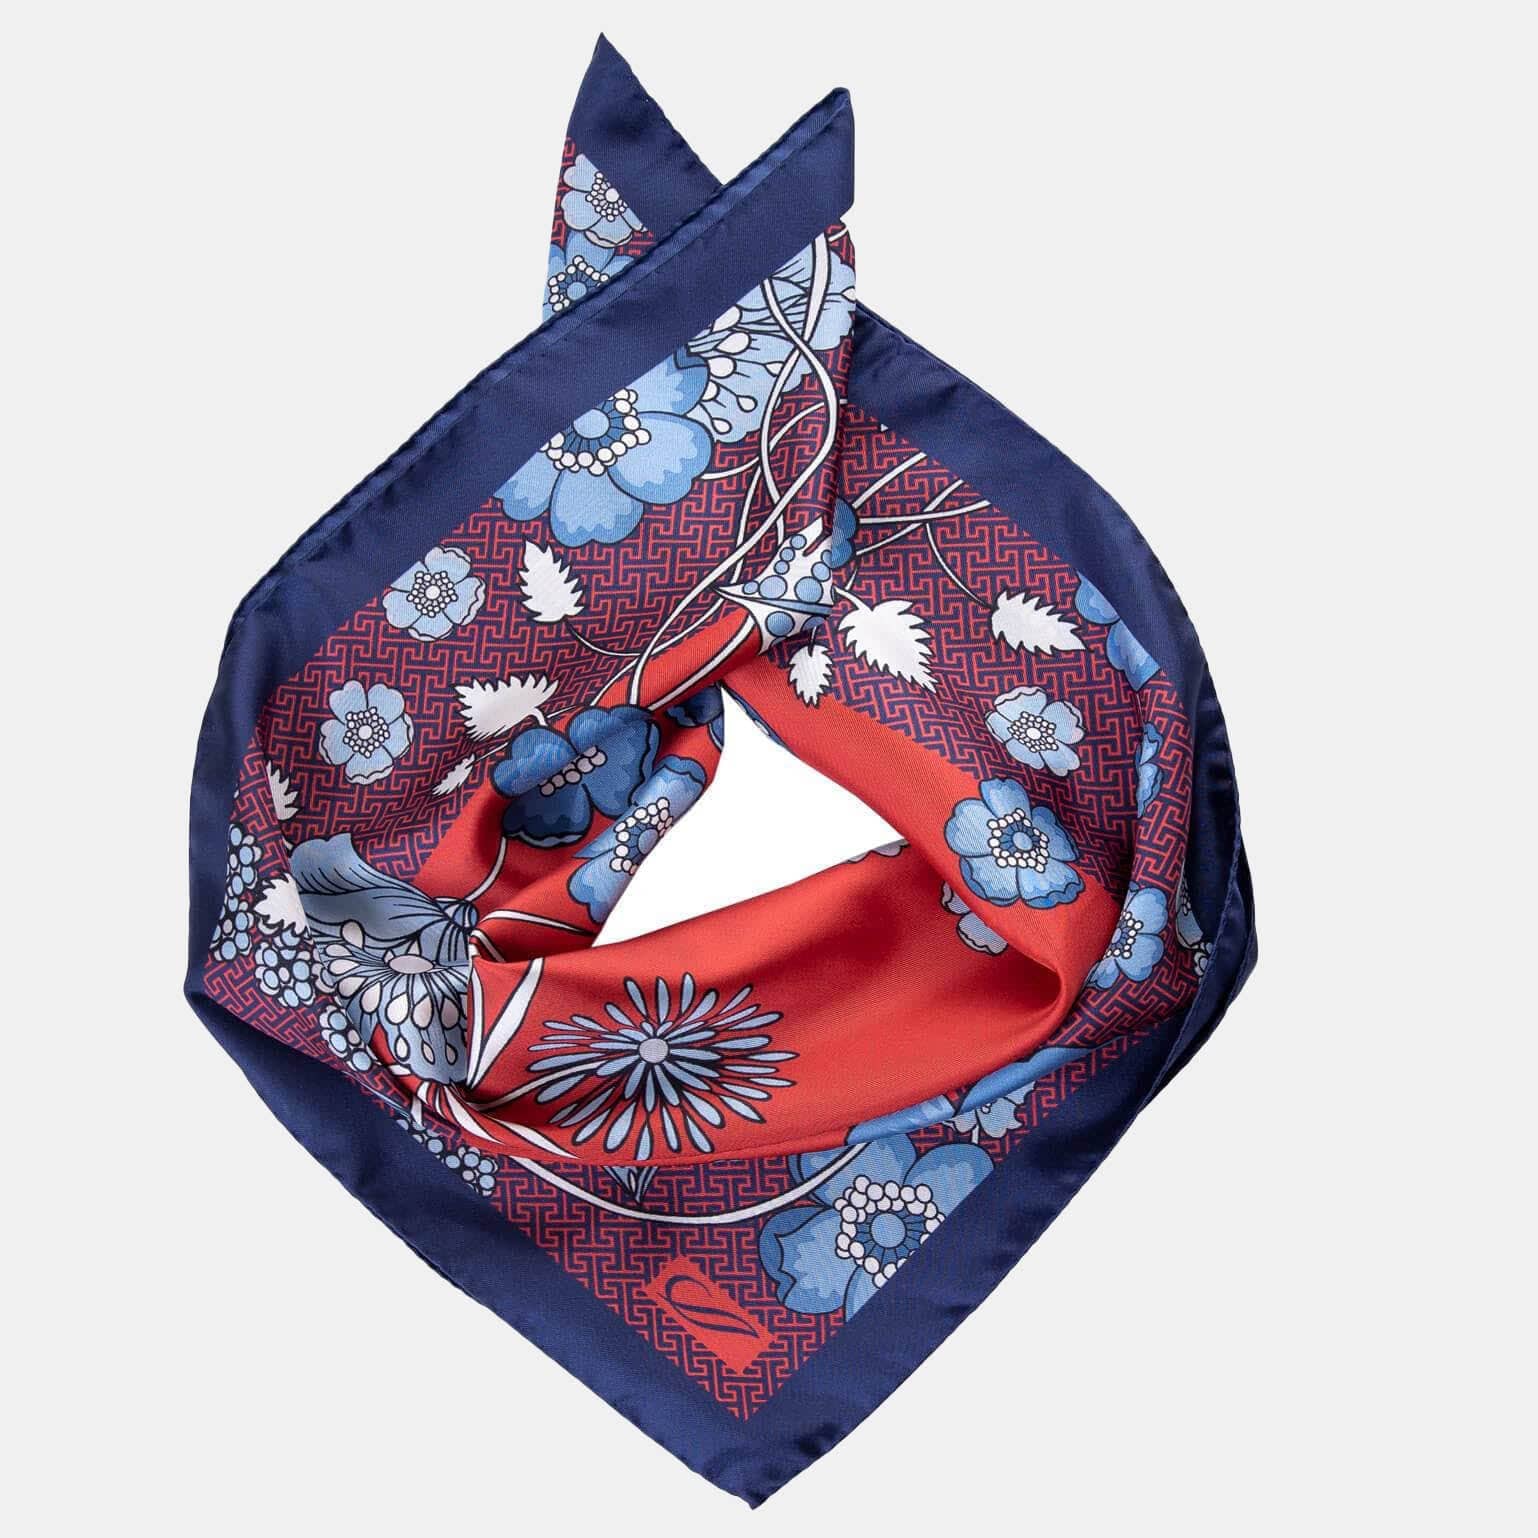 Red Silk Neckerchief - Floral Print Made in Italy